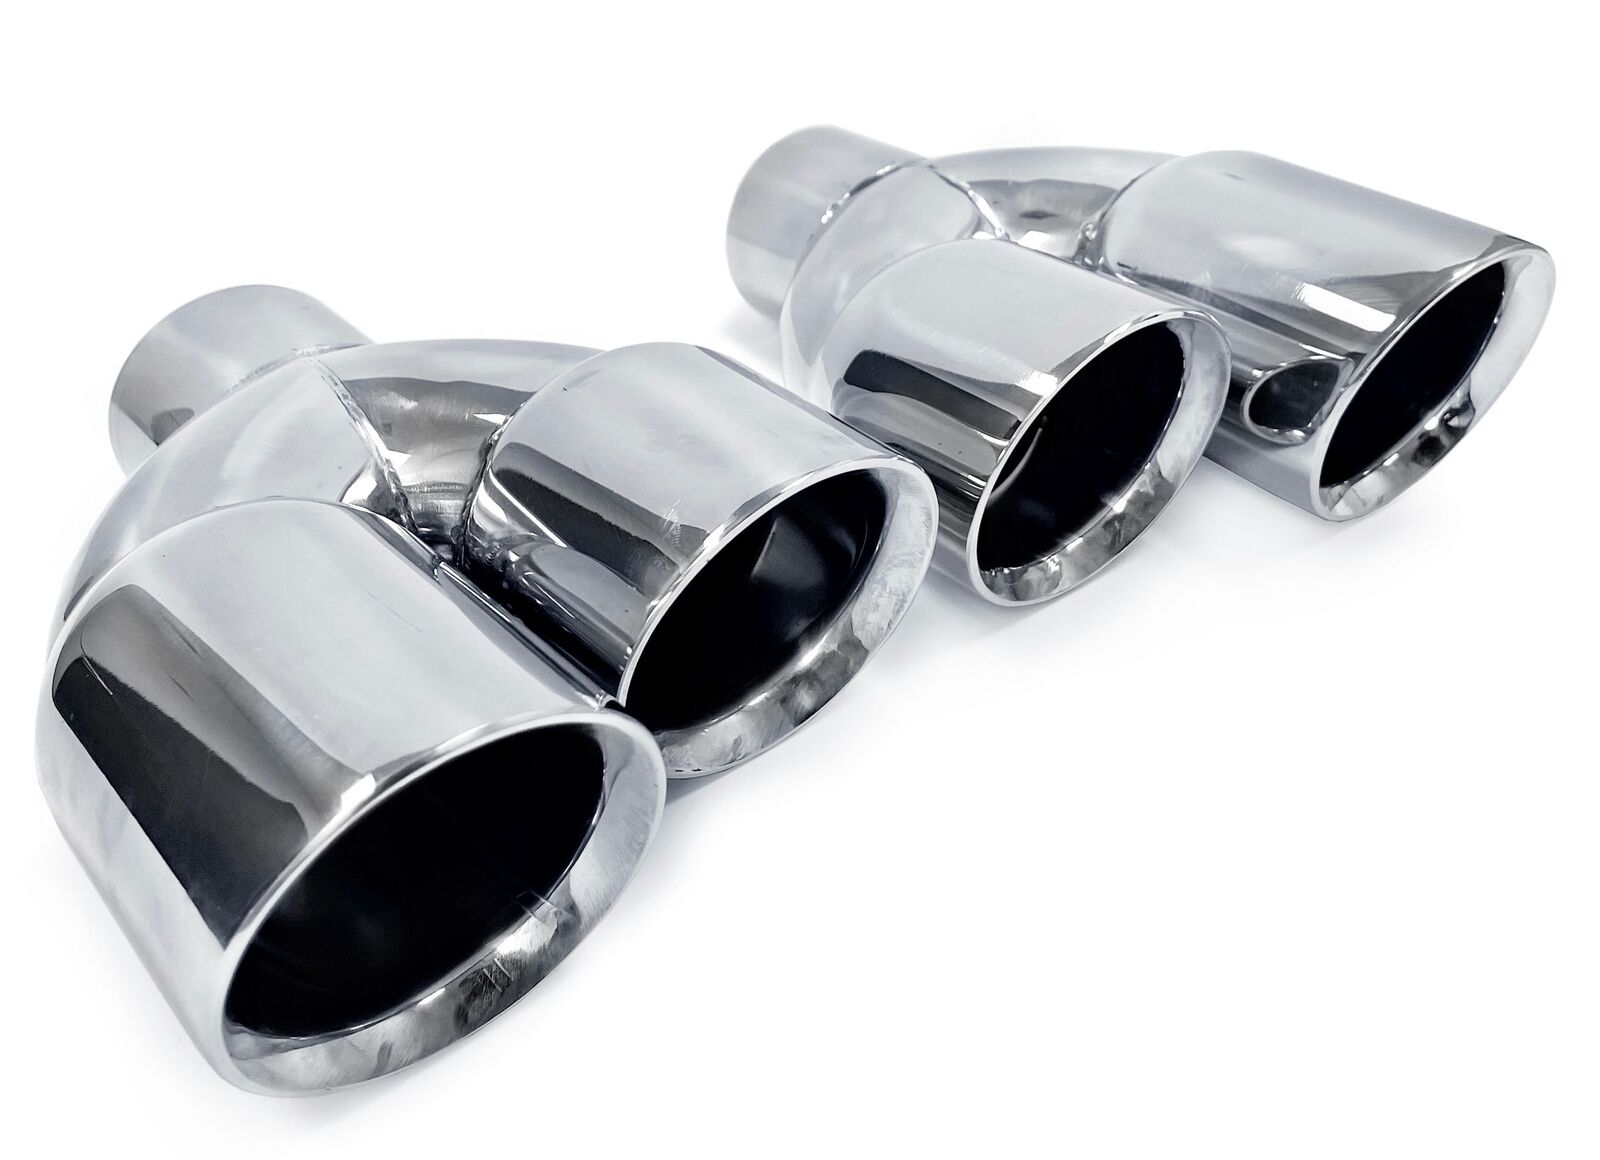 PAIR STAINLESS STEEL UNIVERSAL DUAL EXHAUST TIPS 3